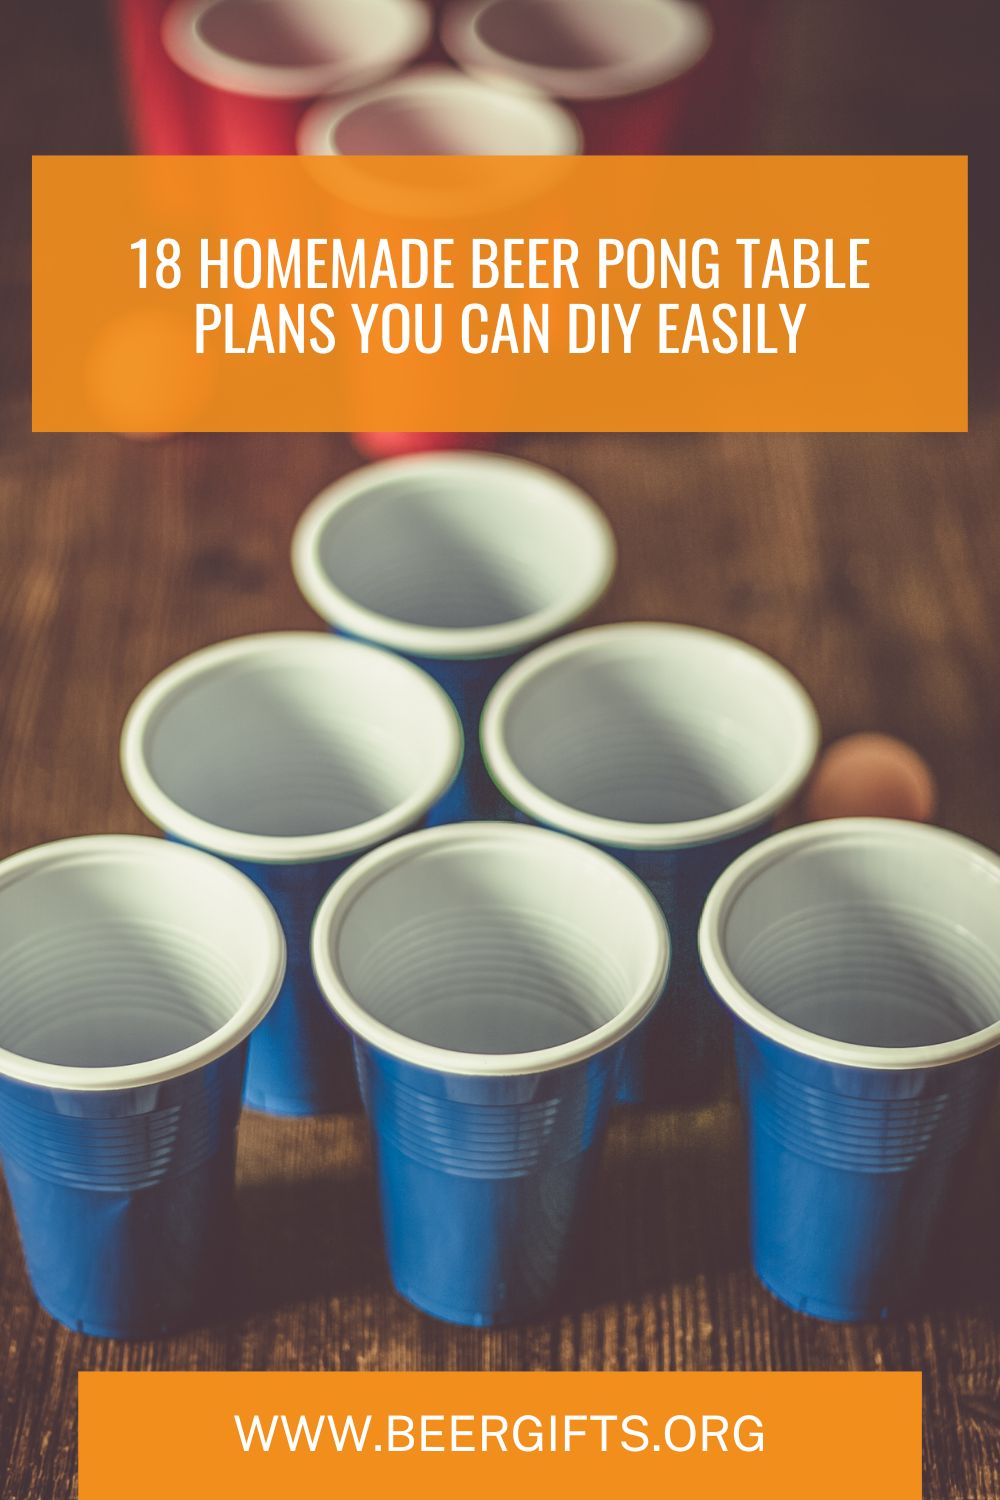 18 Homemade Beer Pong Table Plans You Can DIY Easily 9